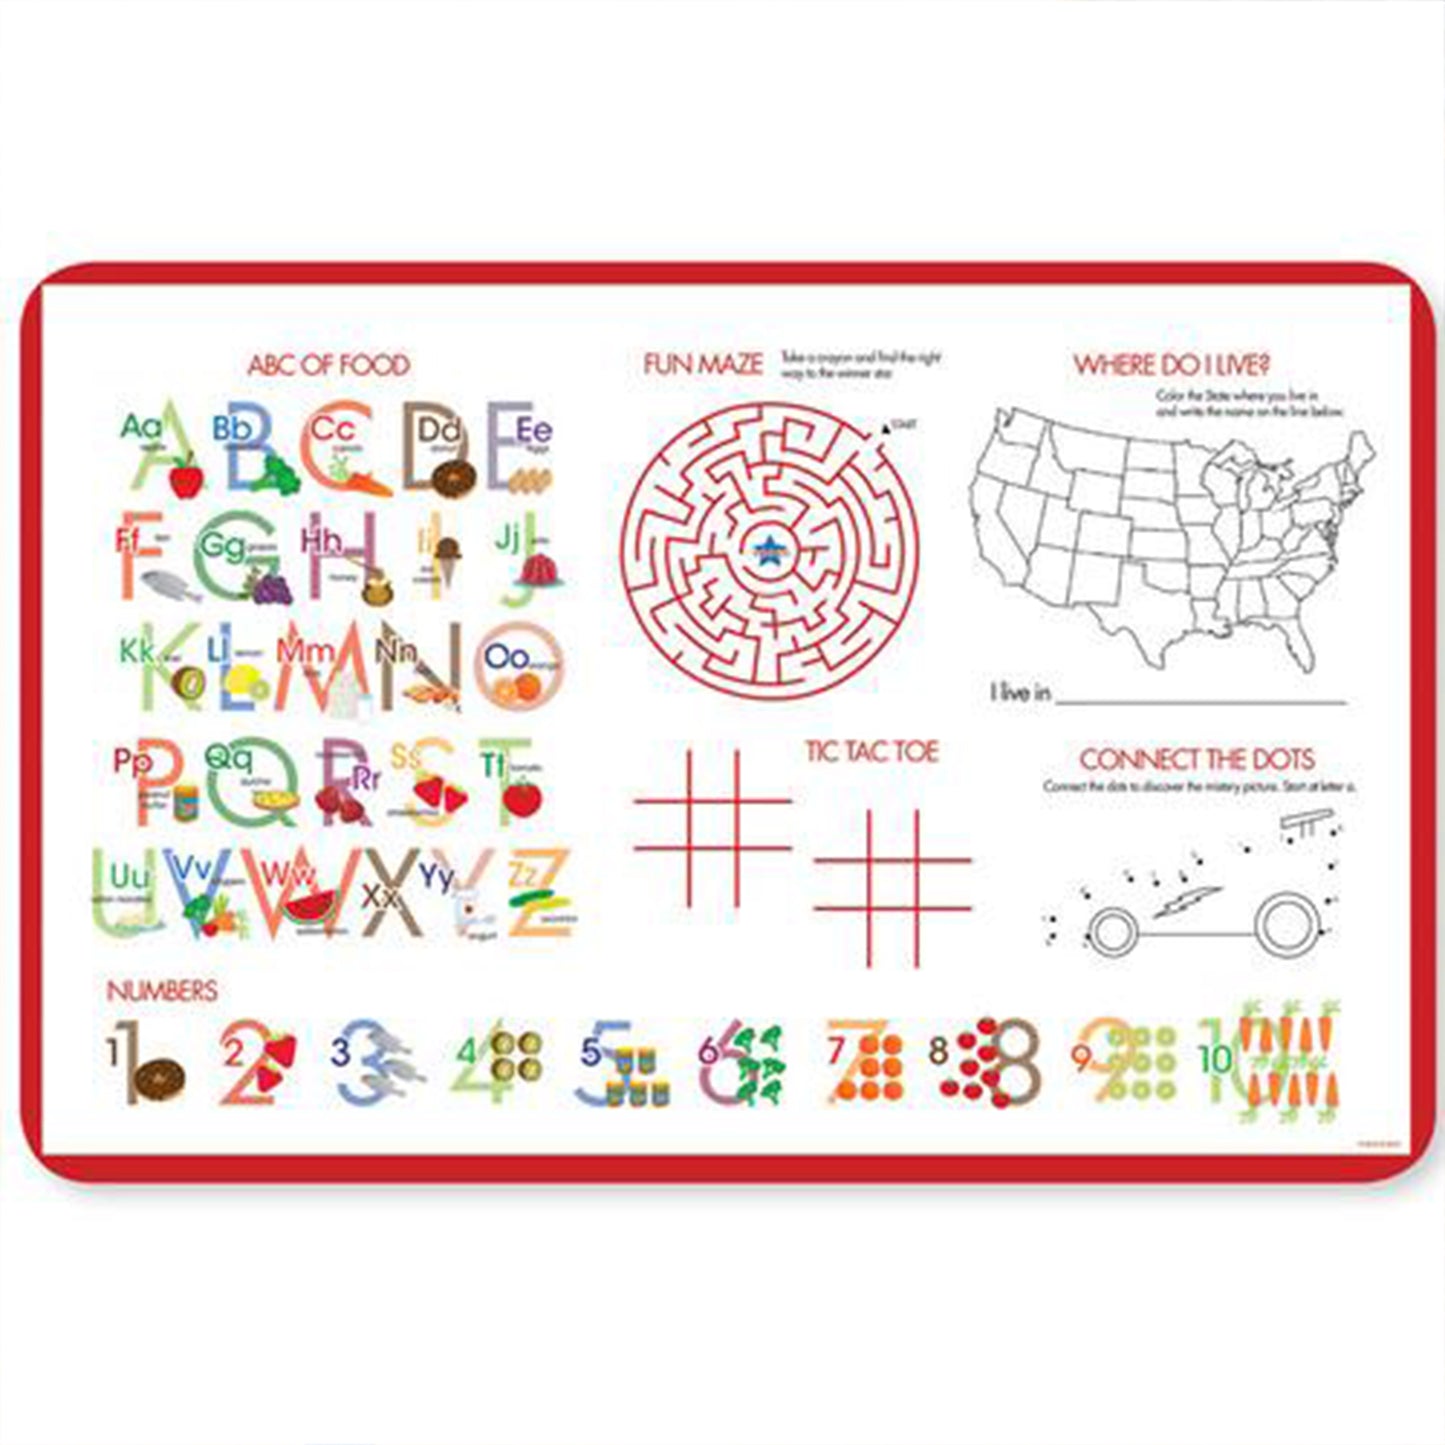 A Day in the Farm Personalized Kids Placemat - Give Wink